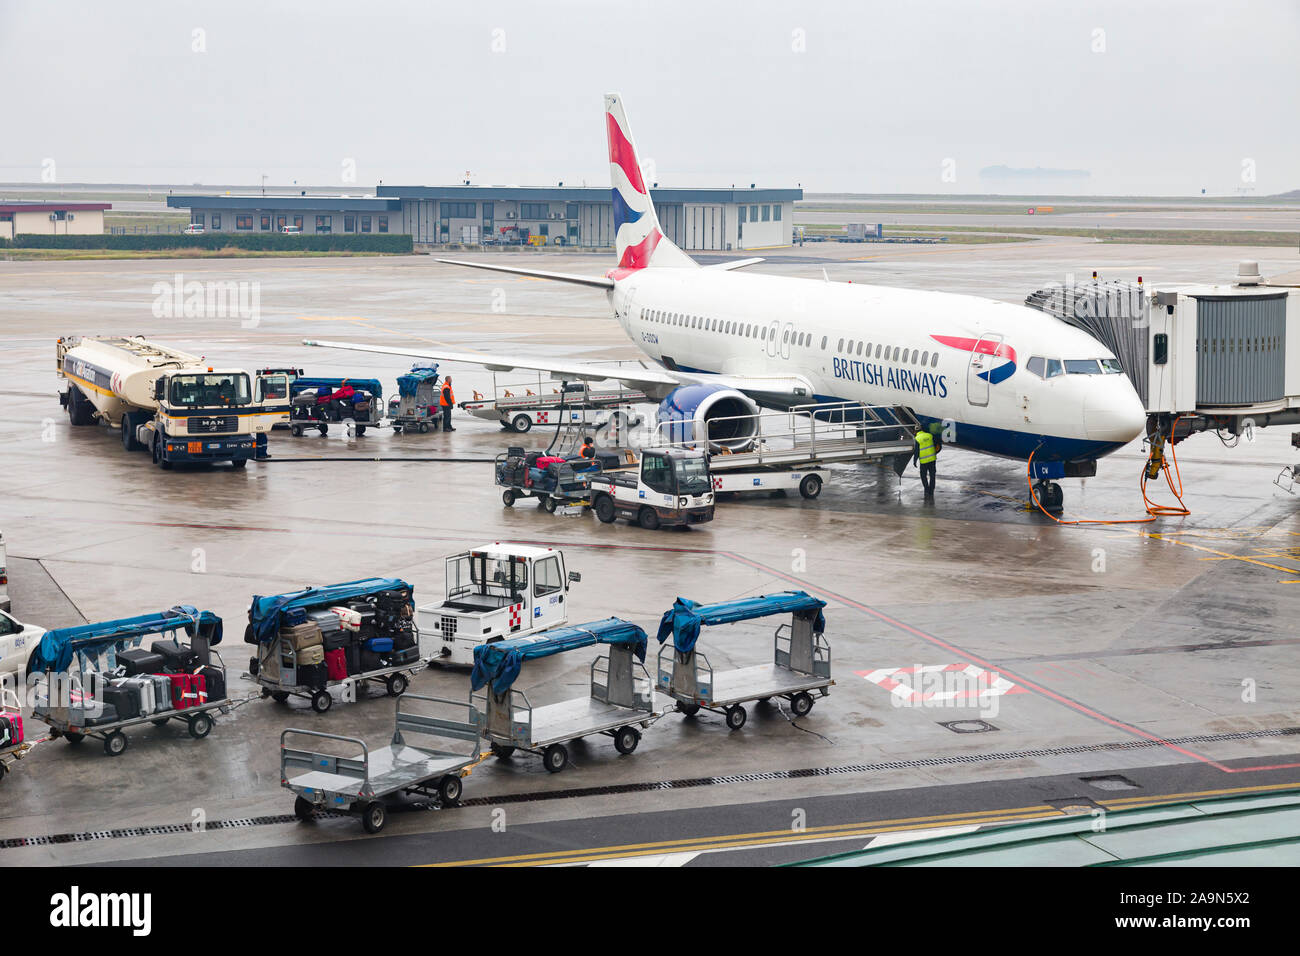 VENICE, ITALY - December 26, 2012. Baggage handlers load luggage onto a British Airways plane at Venice Marco Polo Airport, Venice, Italy Stock Photo